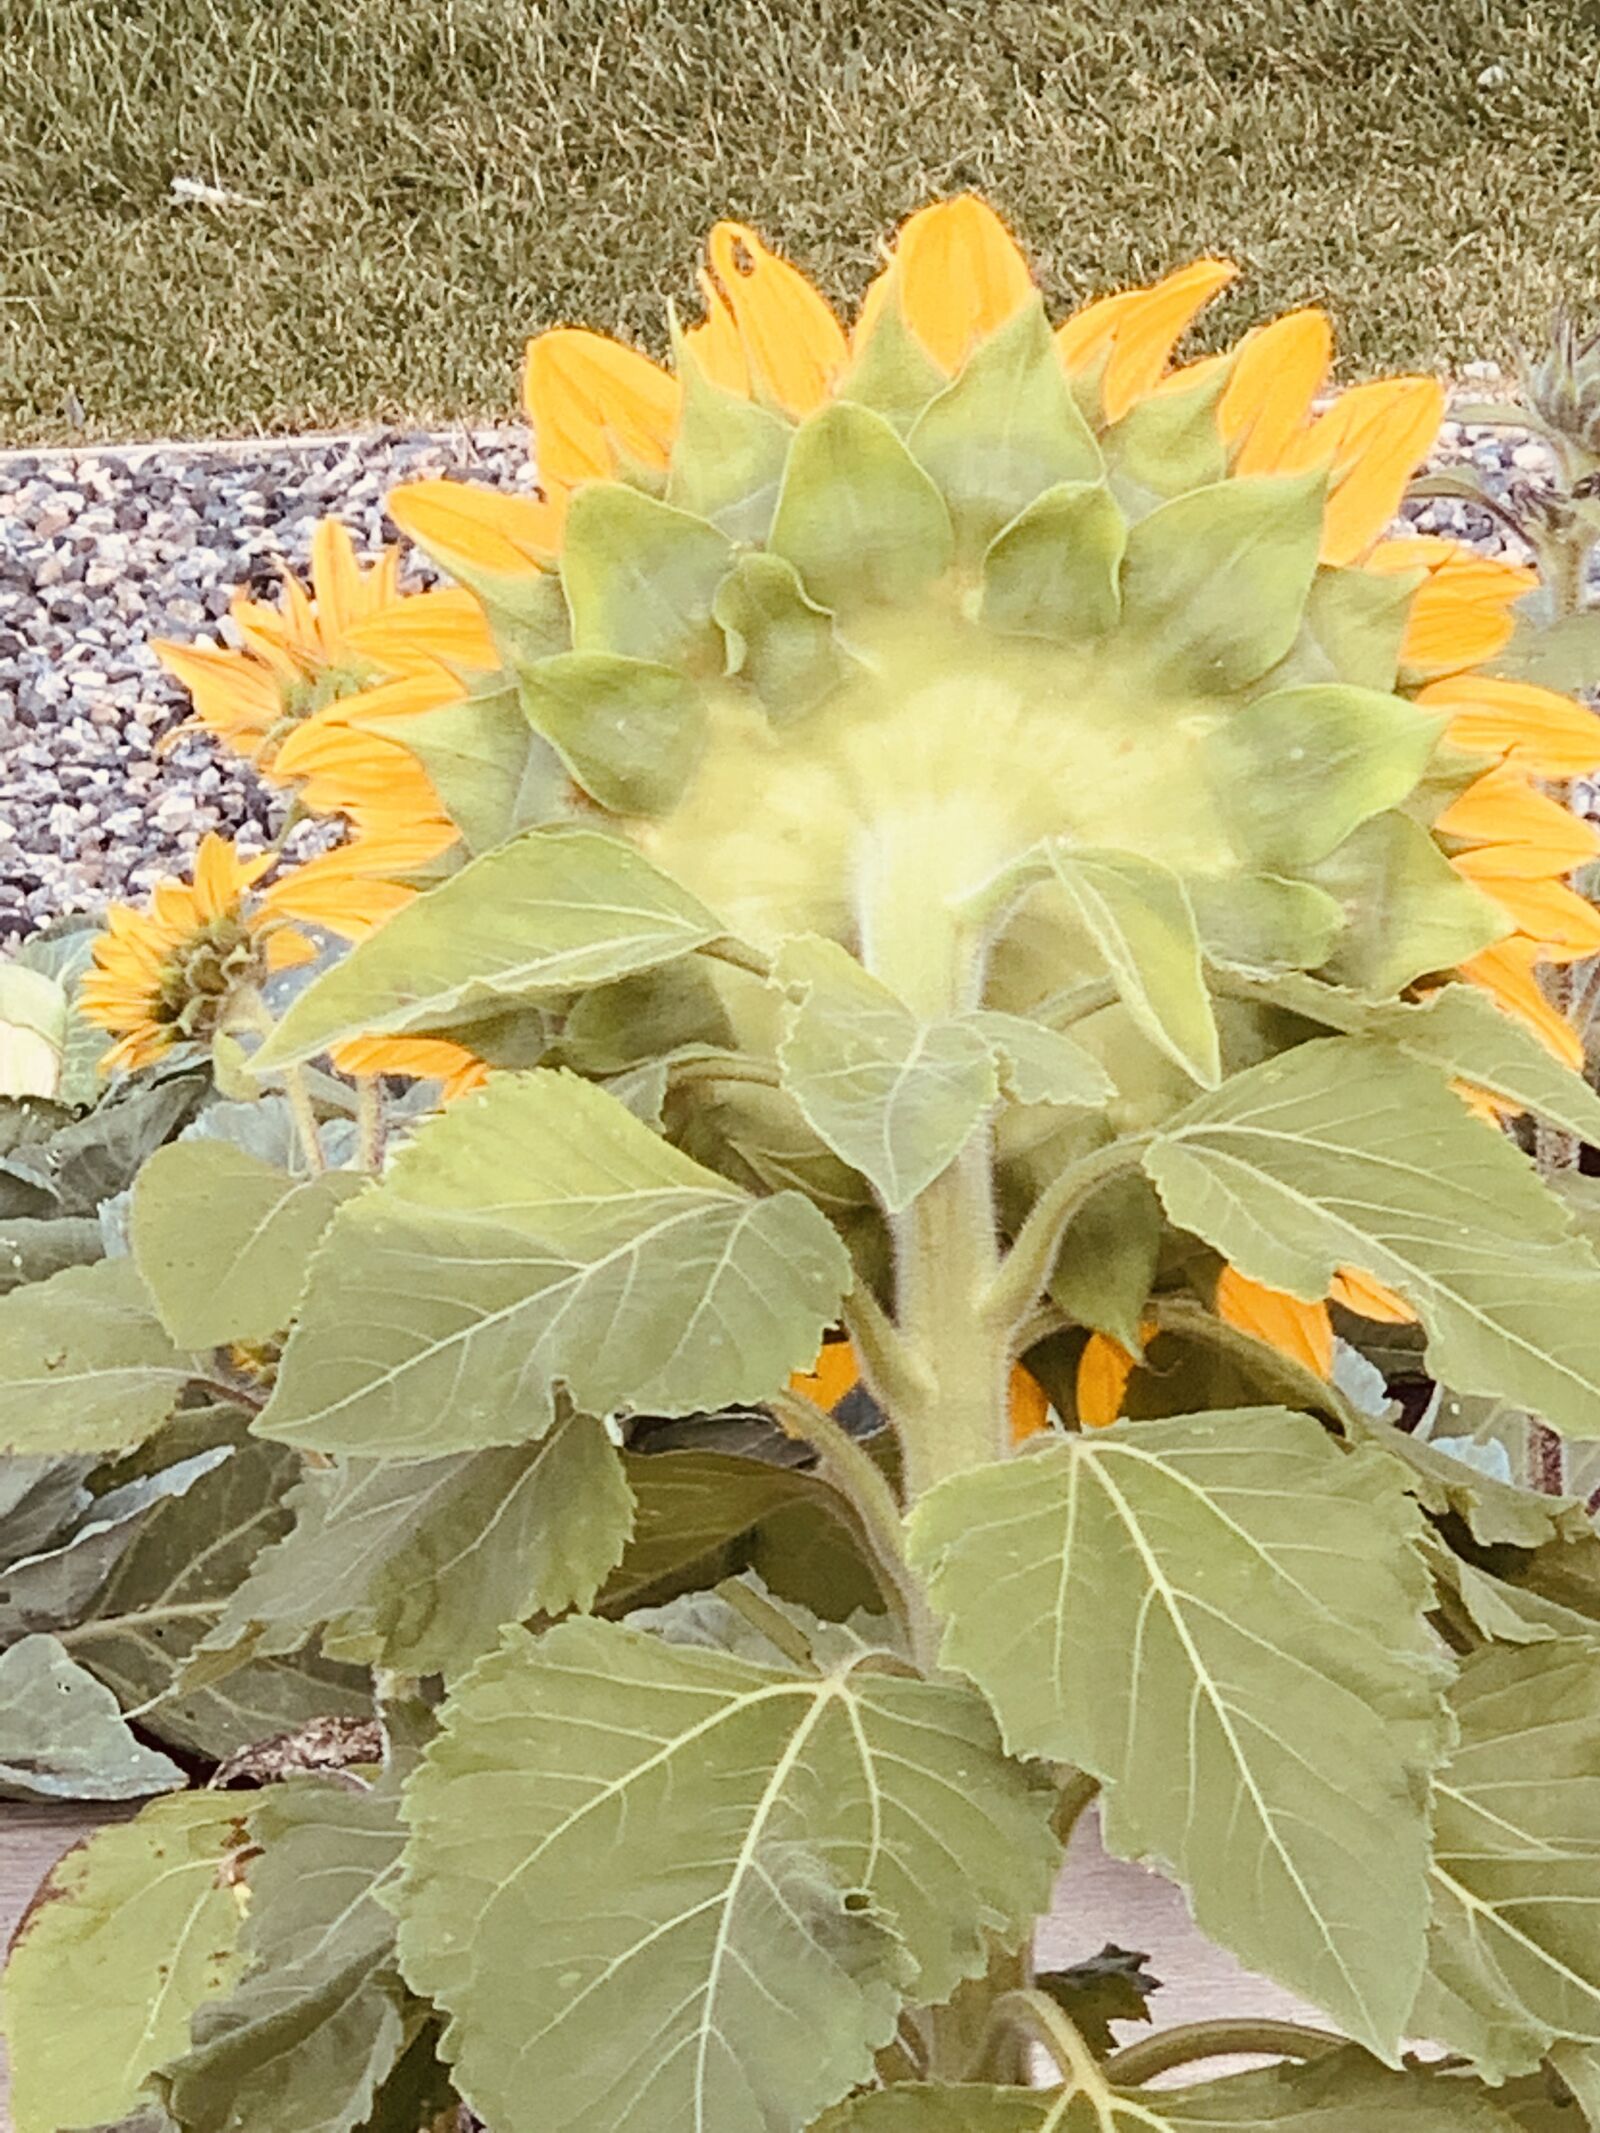 iPhone XS Max back dual camera 6mm f/2.4 sample photo. Sunflower, rearview, summer photography